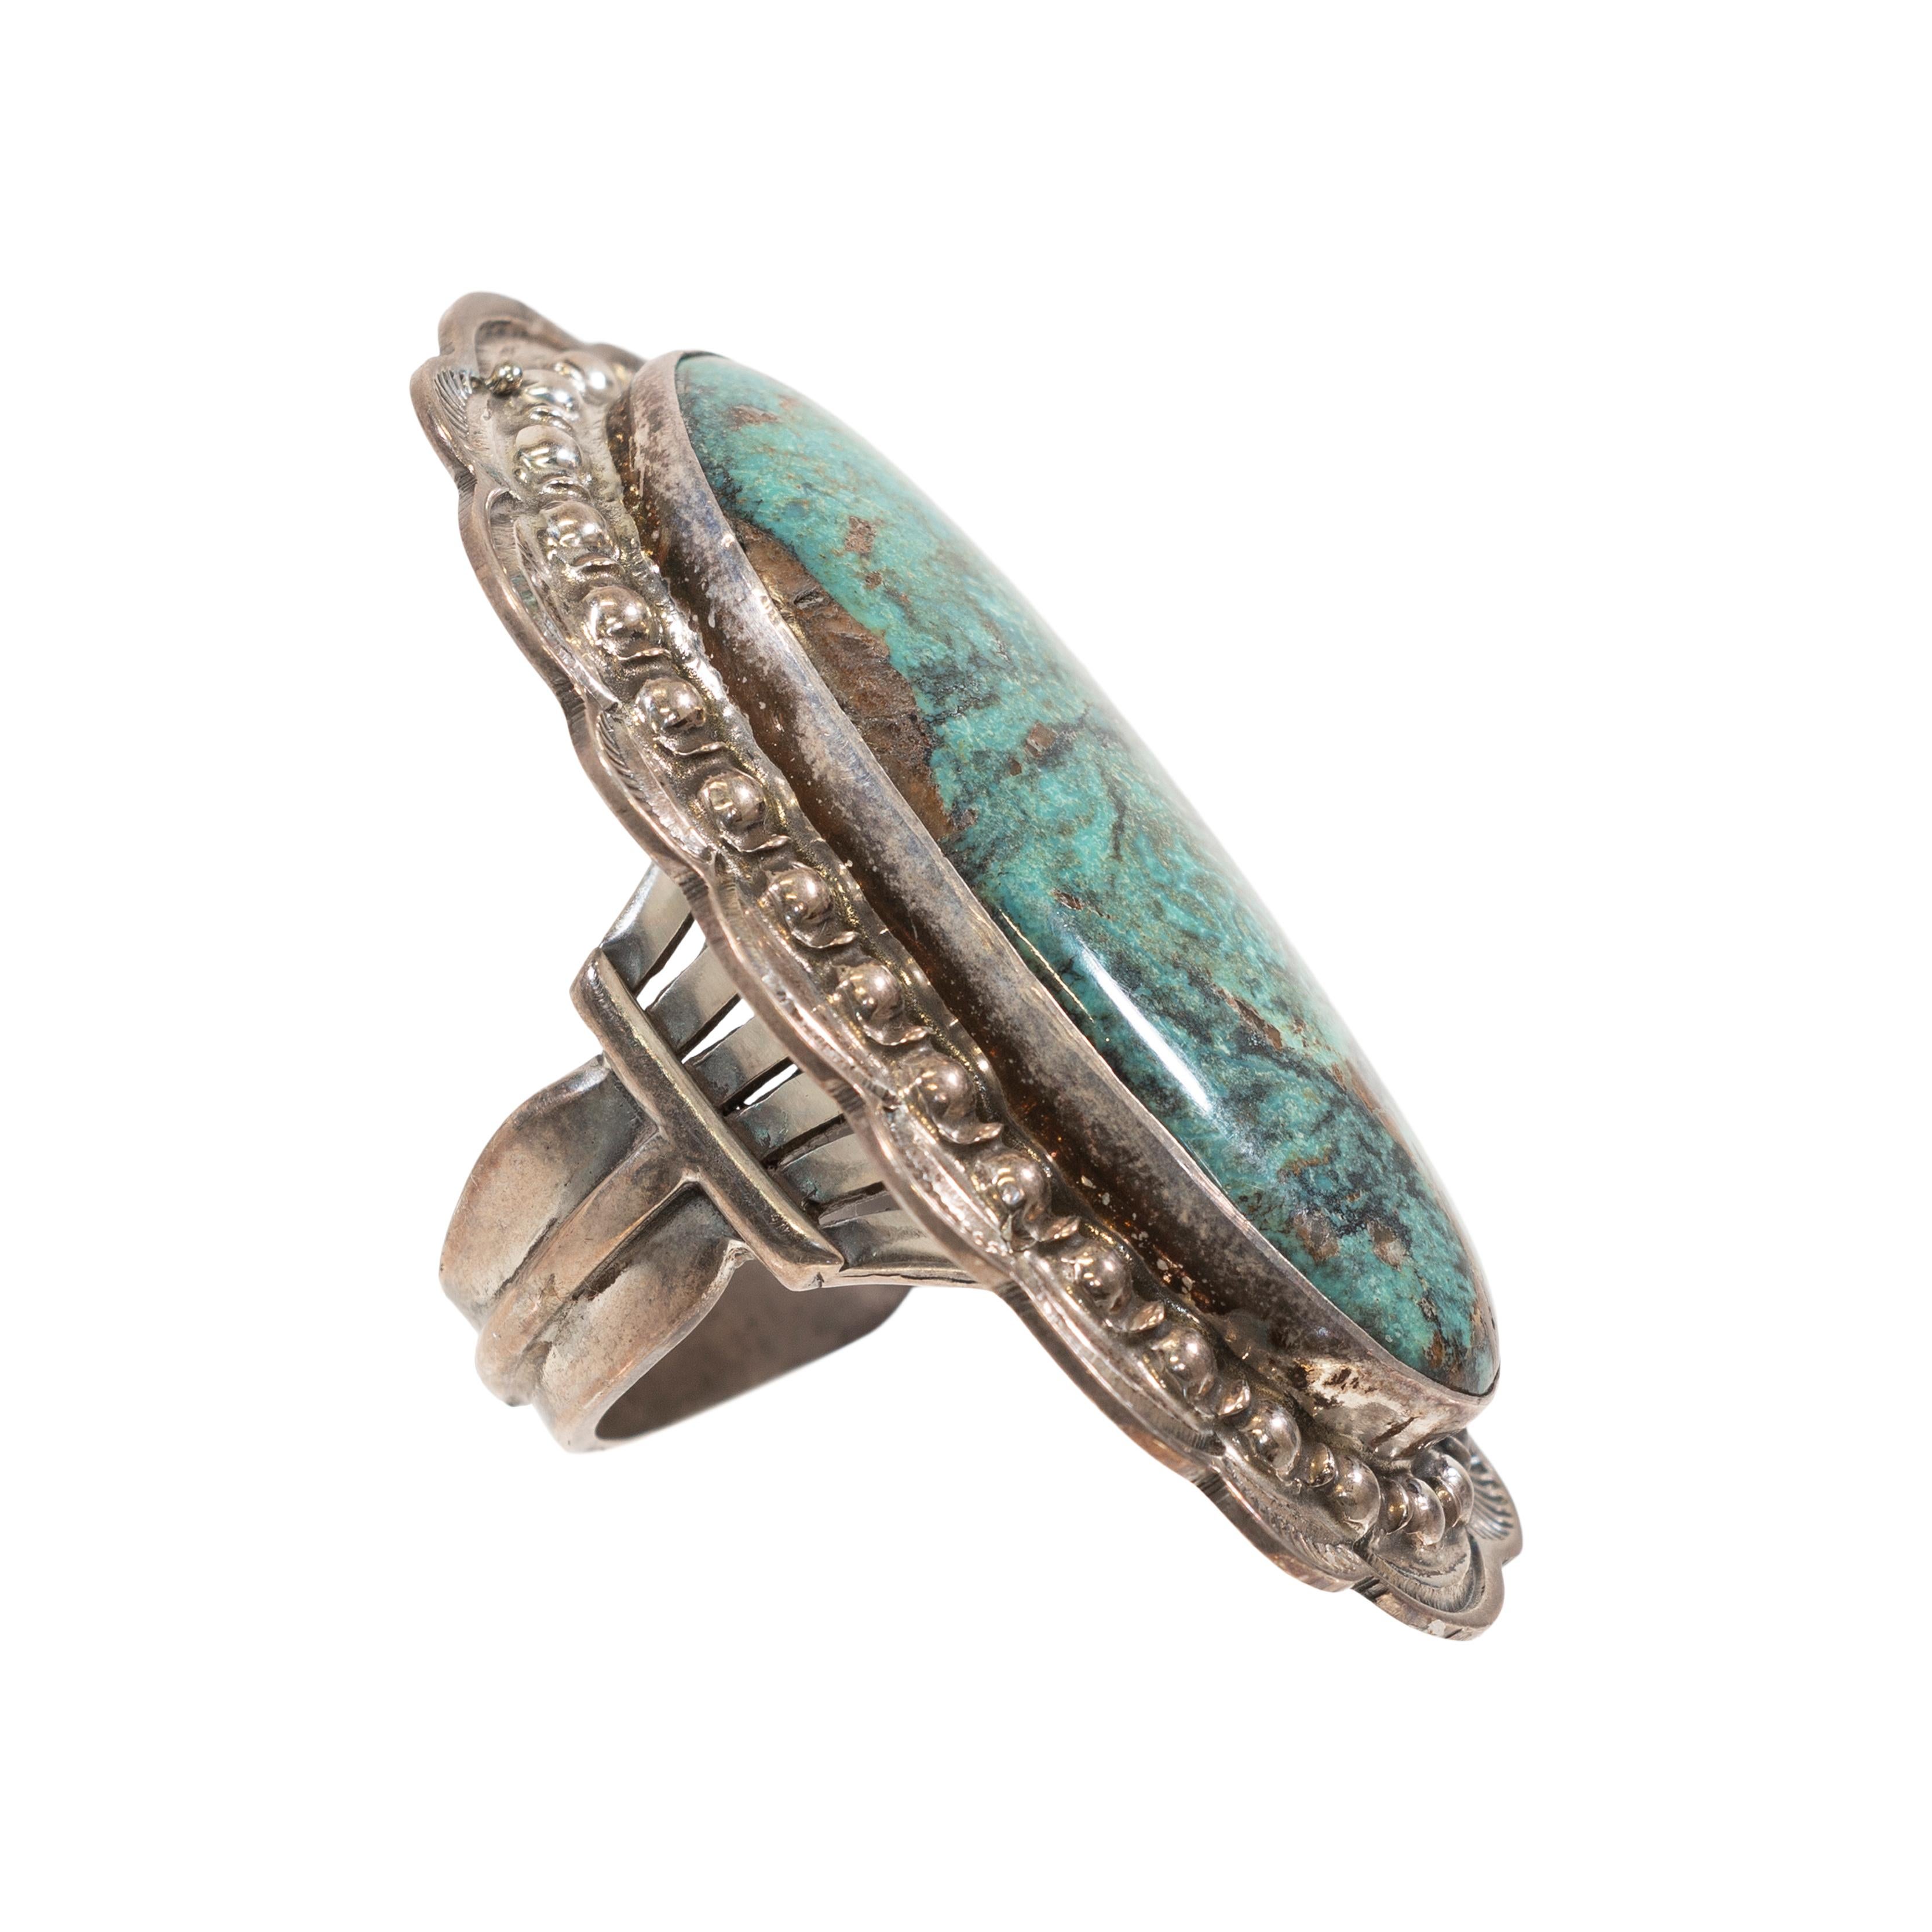 Large Navajo turquoise ring, marked 'Charles Johnson'. Sterling. Beautiful hand stamped silver work of Navajo pearls and lines. 

PERIOD: After 1950

ORIGIN: Navajo, Southwest

SIZE: Ring Sz: 8.5 ; Face: 2 1/4